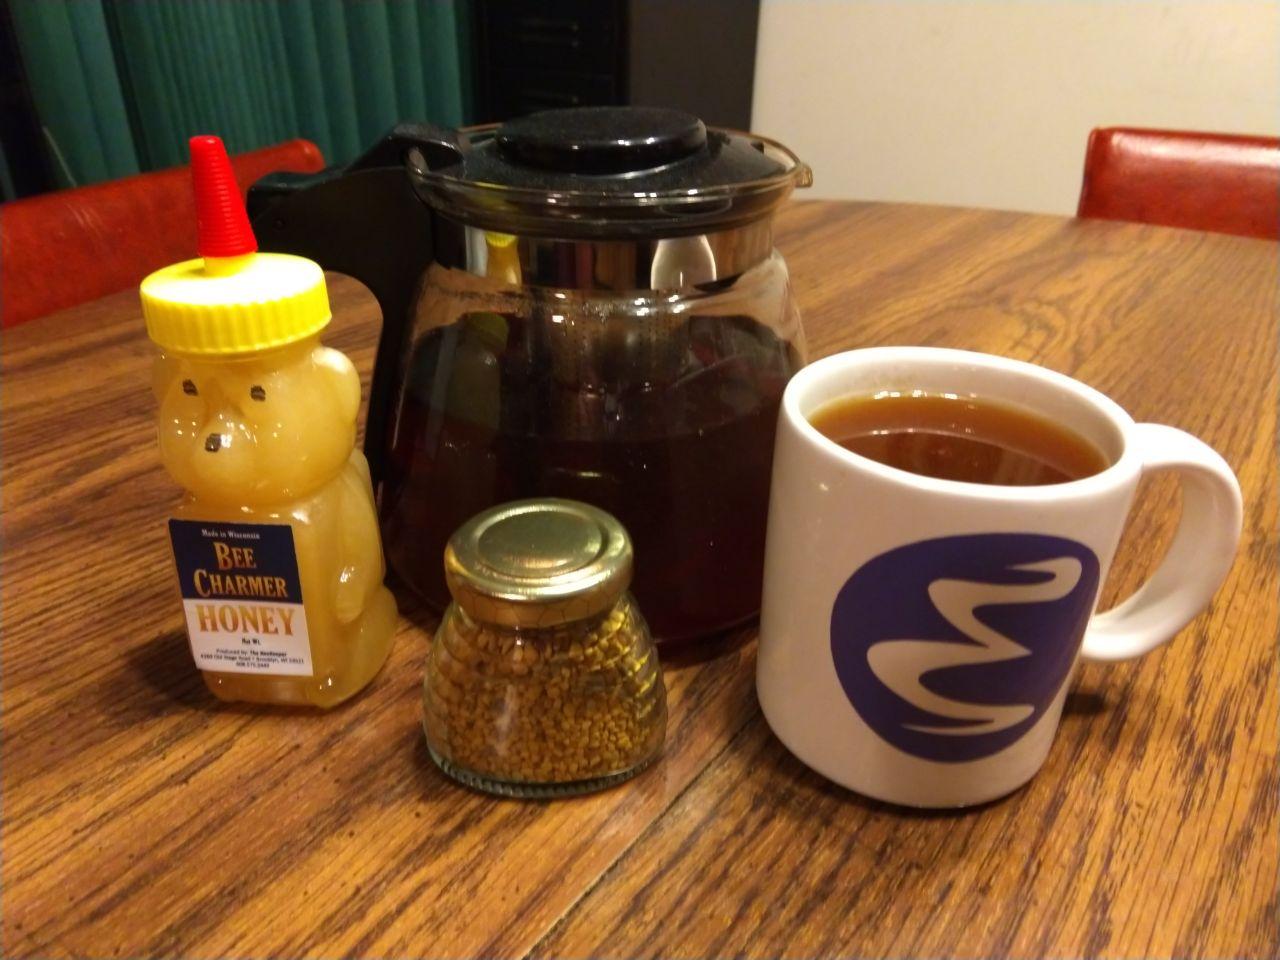 A pot of tea with raw honey and pollen that my sister got me from the farmer's market for Christmas.